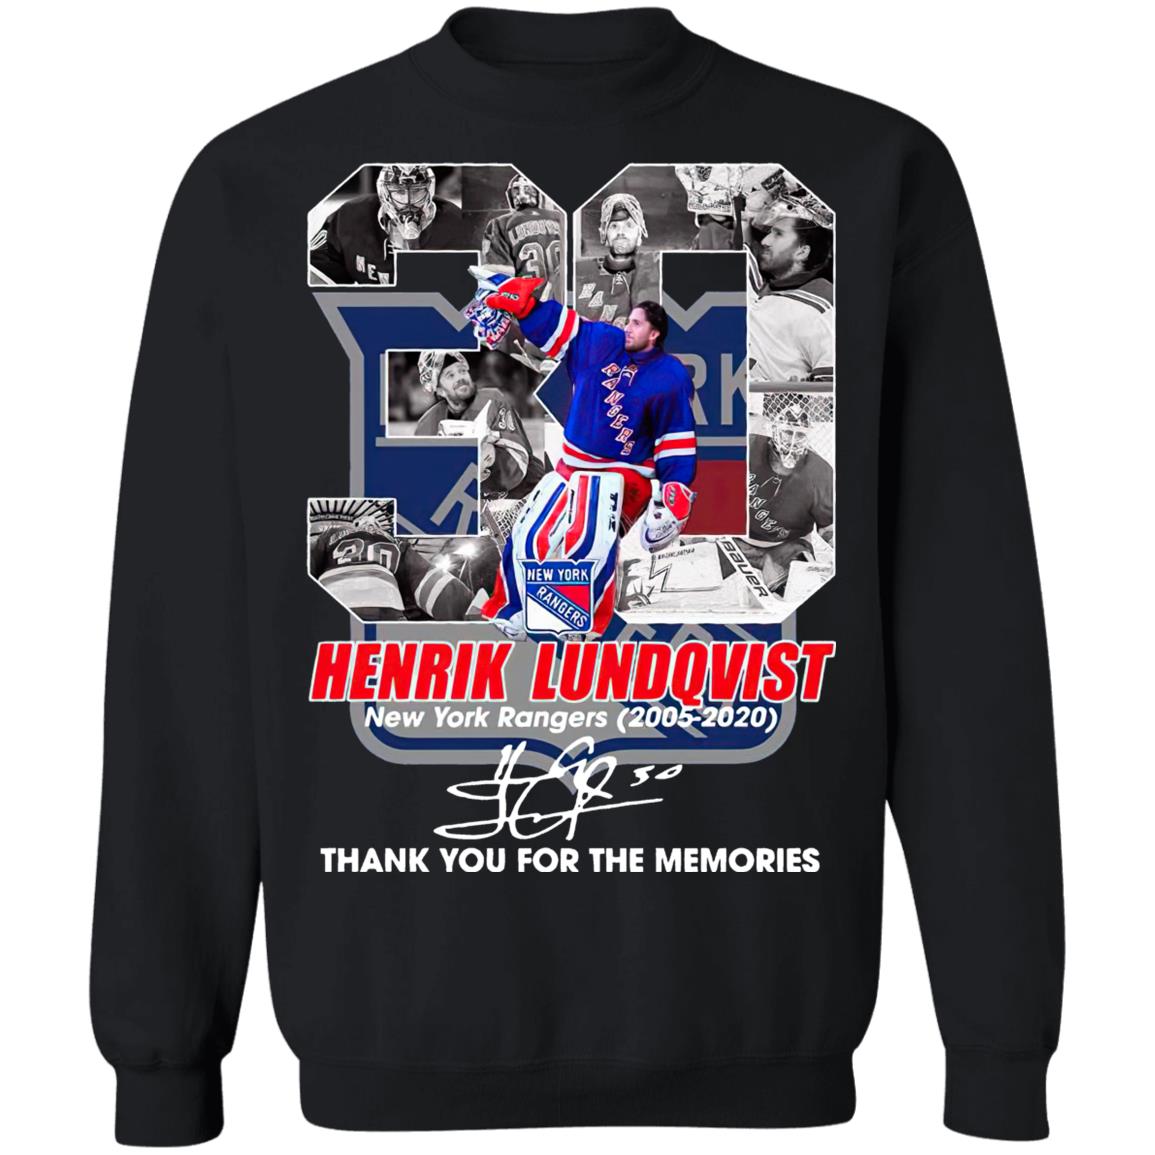 Henrik Lundqvist New York Rangers Signature Thank You For The